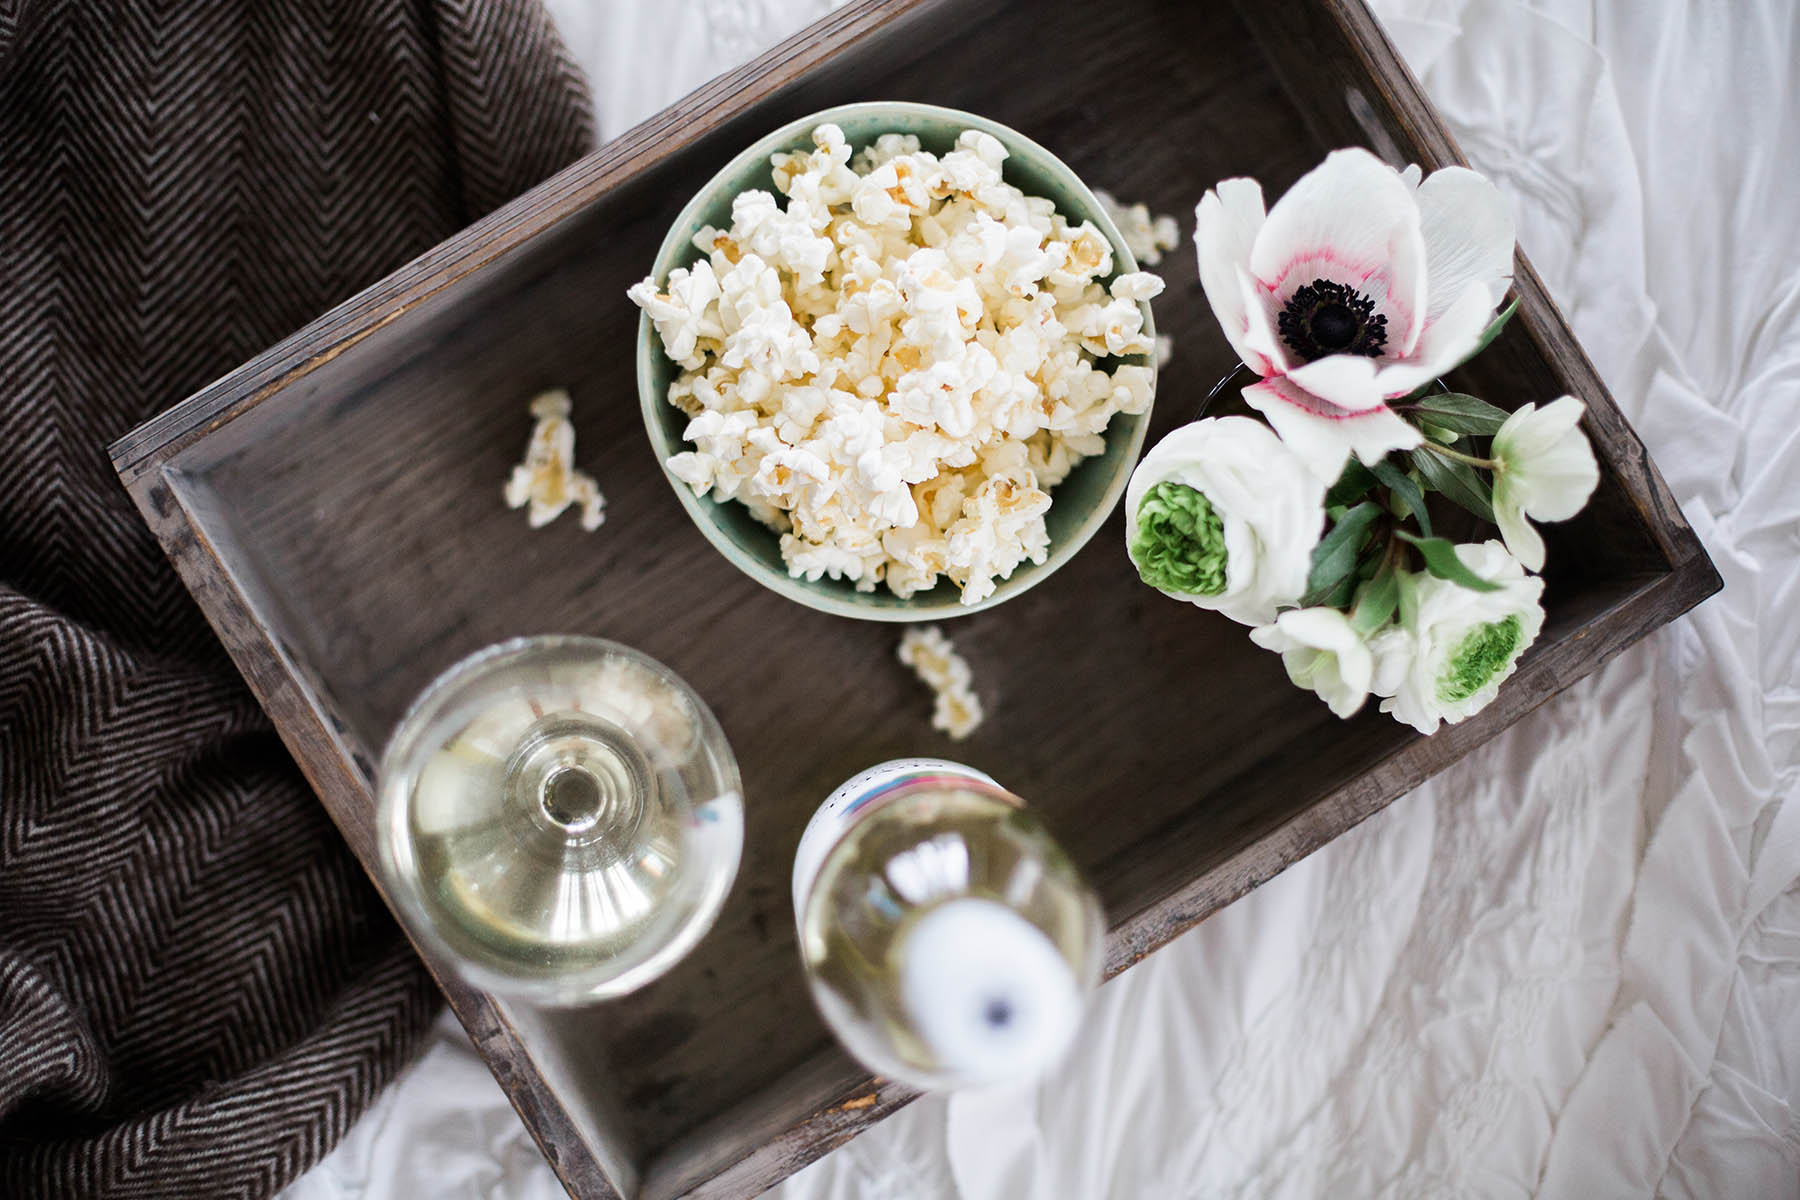 tray of popcorn and seven daughters wine on bed for movie night